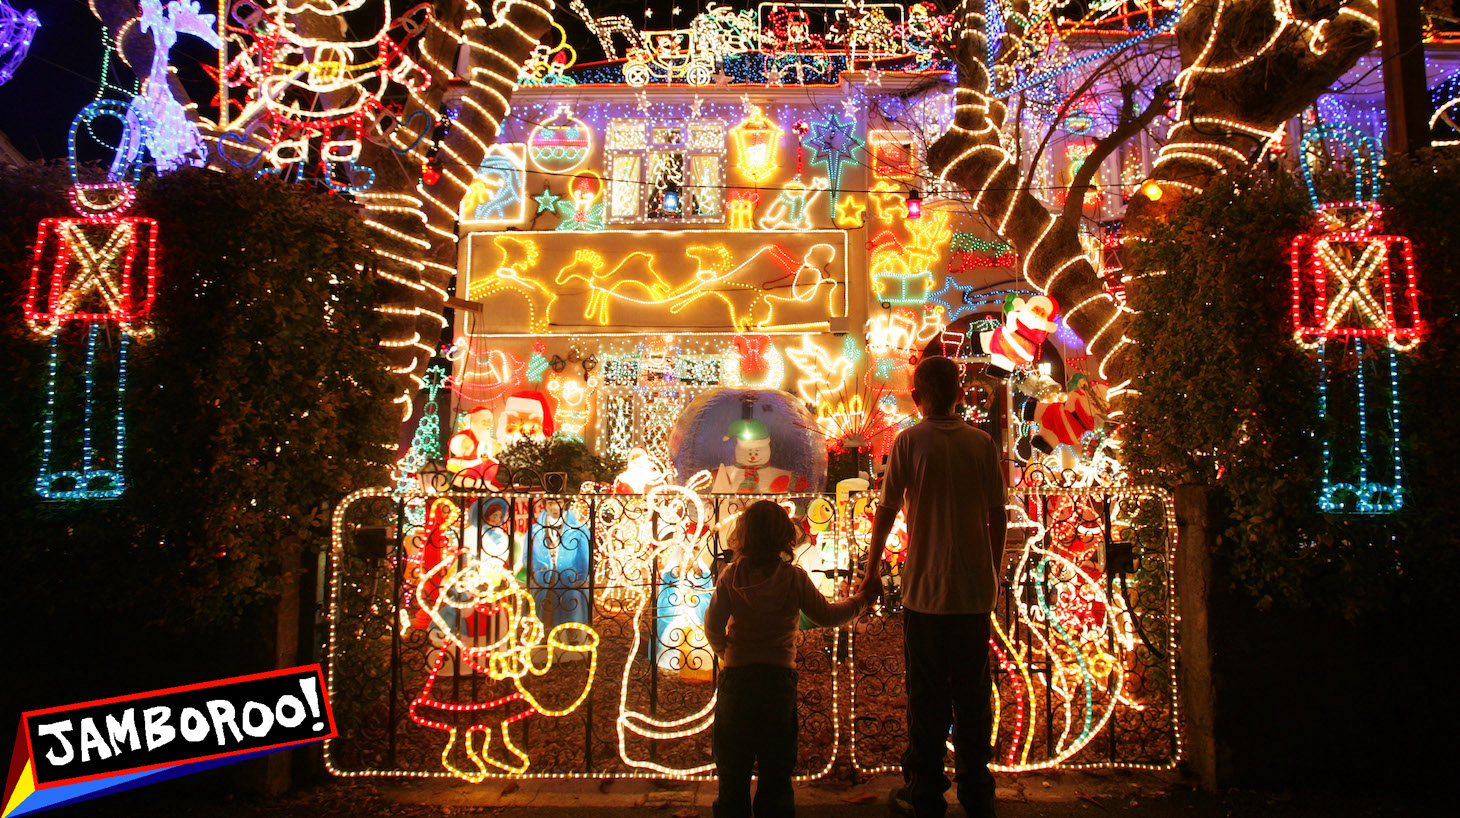 MELKSHAM, UNITED KINGDOM - DECEMBER 01: Children look at the Christmas lights displayed on a house on December 1, 2008 in Melksham, England. The householder Alex Goodwind - who says he does it to raise money for charity after his mother died a few years ago - starts planning lights in July and has spent 3,000 GBP this year alone on the lights that are now estimated to be worth 30,000 GBP. Last year the bill for electricity was 700 GBP and the house had to have an uprated electricity supply installed to cope with the additional power needed. Donations from visitors to the spectacle raised over 2,000 GBP to local hospice Dorothy House. (Photo by Matt Cardy/Getty Images)